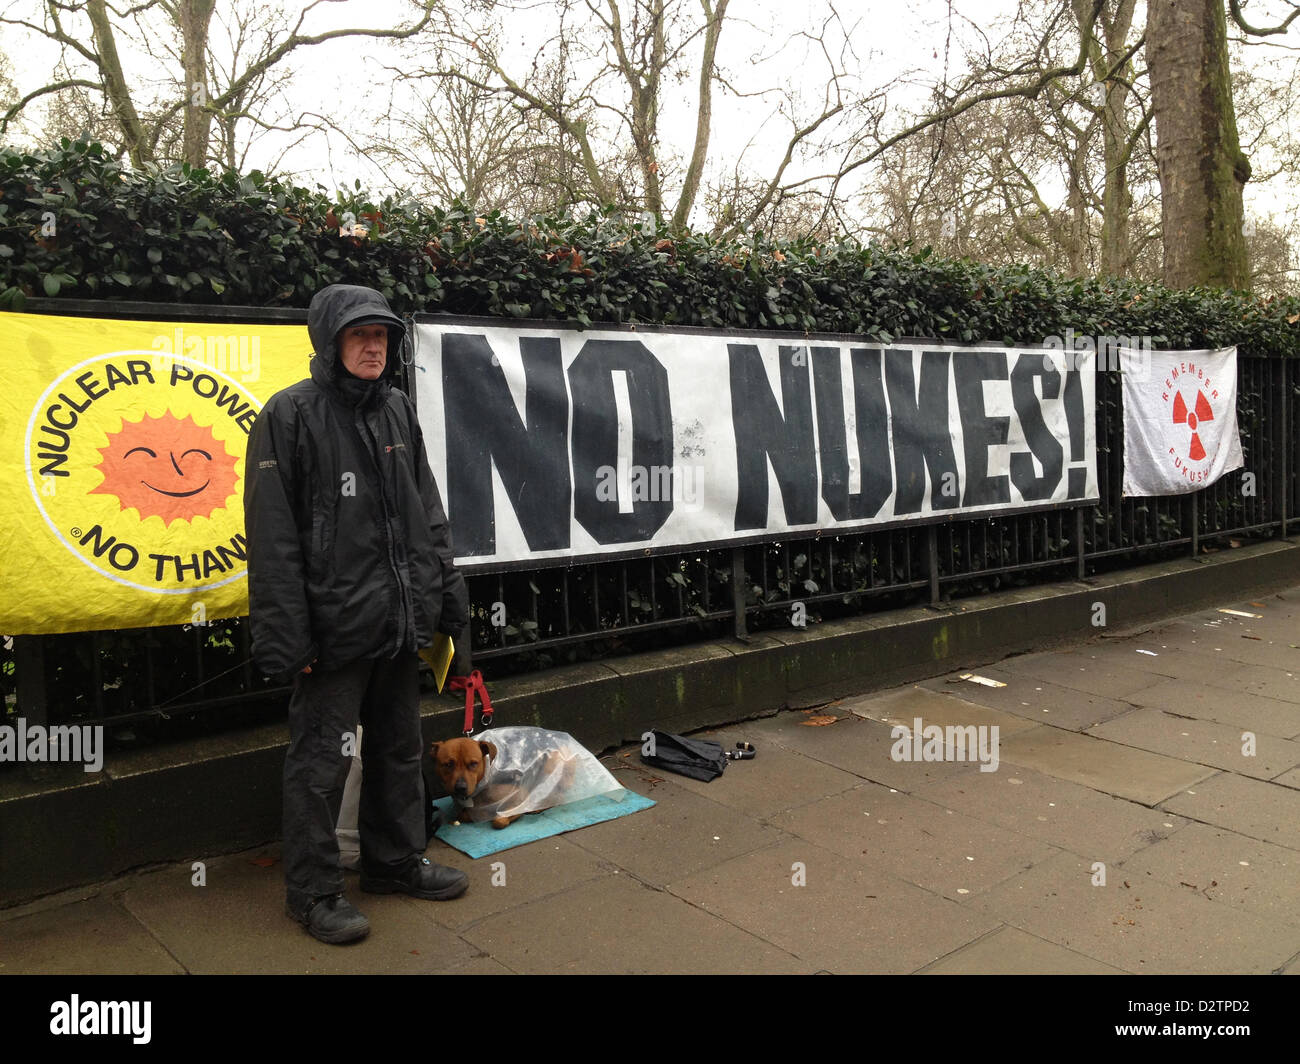 London, UK, 1st February 2013. Anti nuclear power demonstration in front of the Japanese embassy on Piccadilly. These demonstrations are held every Friday in solidarity with Japanese anti-nuclear power protestors. They are organized by Kick Nuclear and Japanese Against Nuclear. Stock Photo